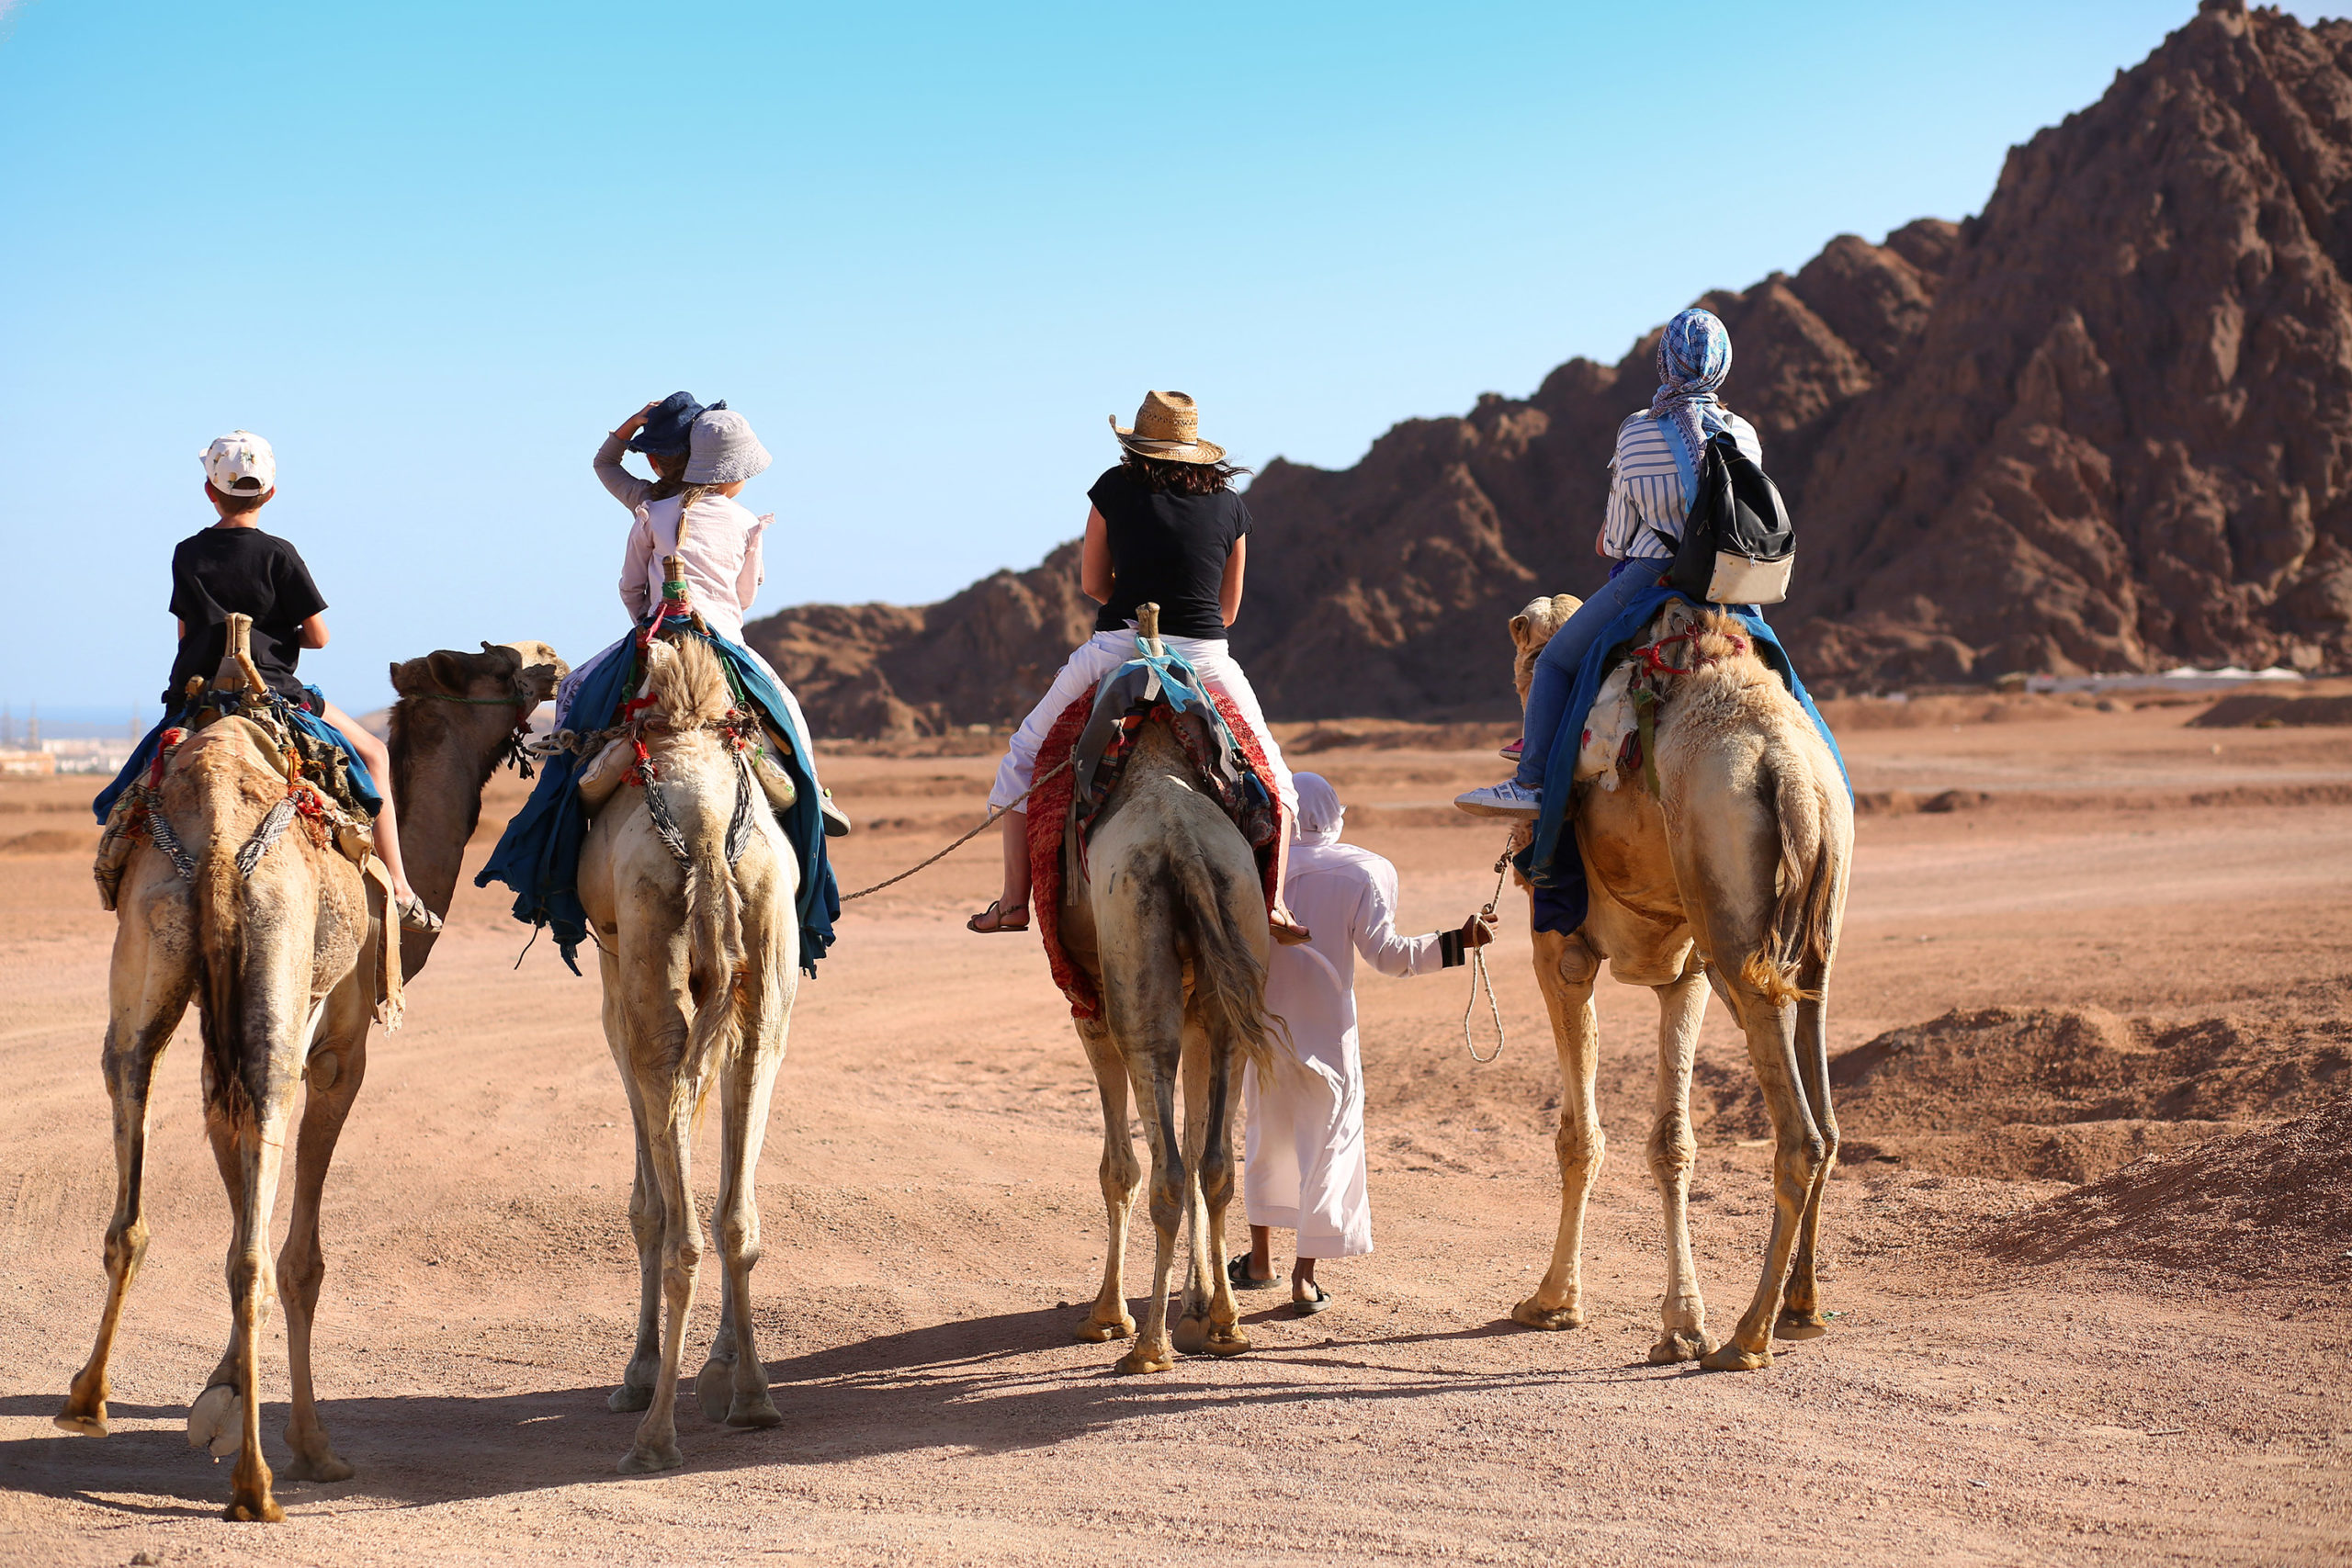 Five people in casual clothing ride camels in the desert, being led by a guide.